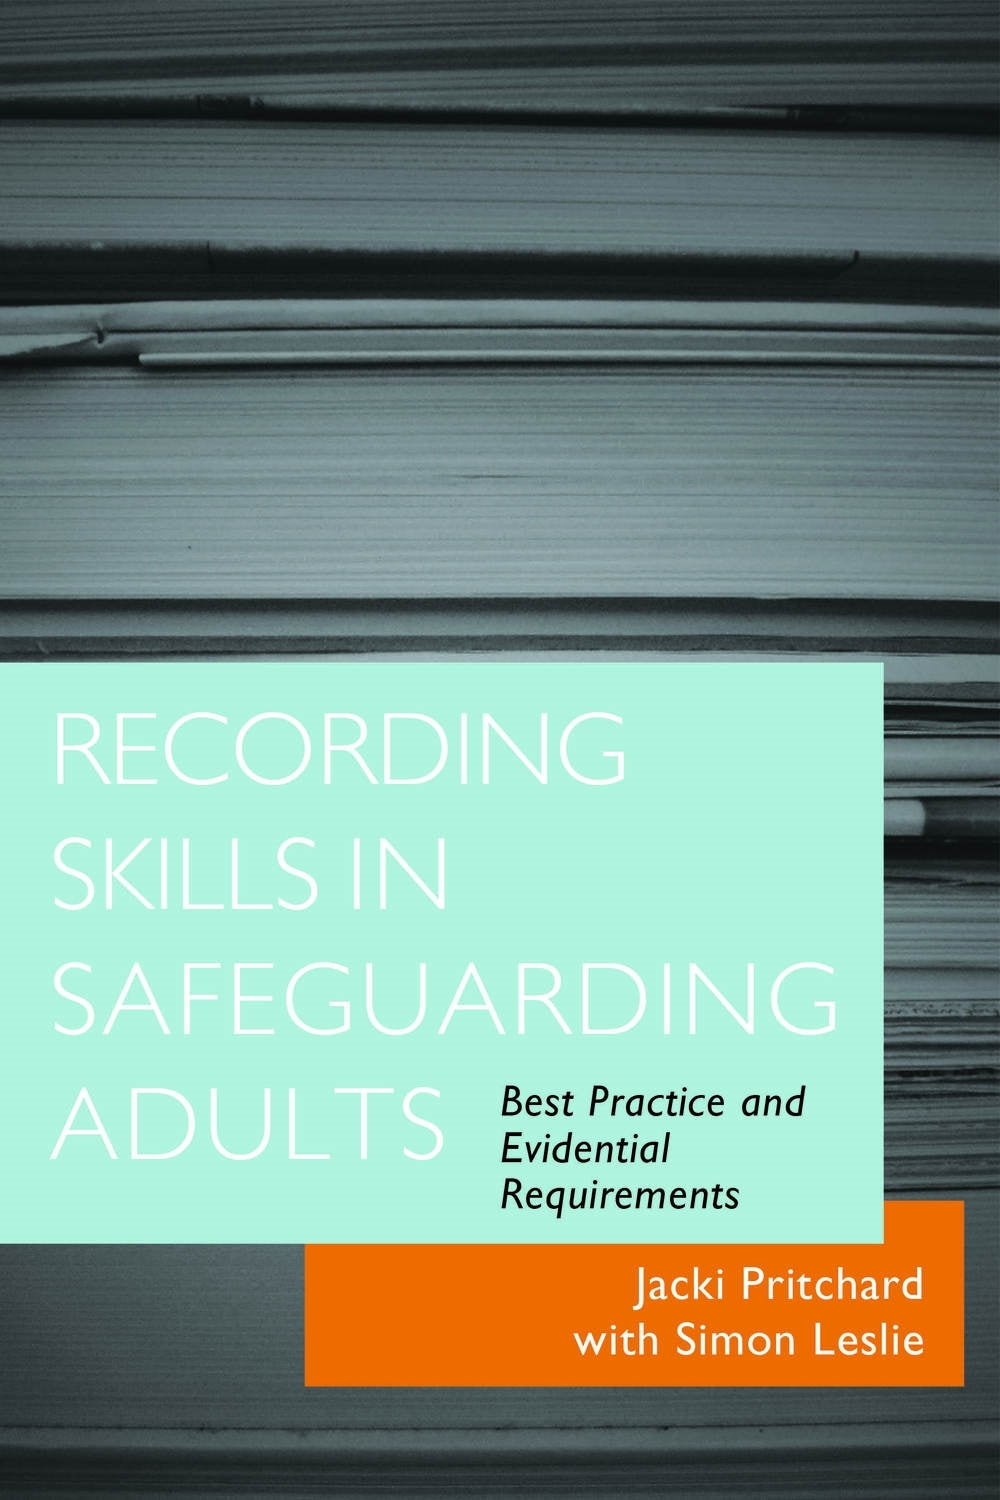 Recording Skills in Safeguarding Adults by Jacki Pritchard, Simon Leslie